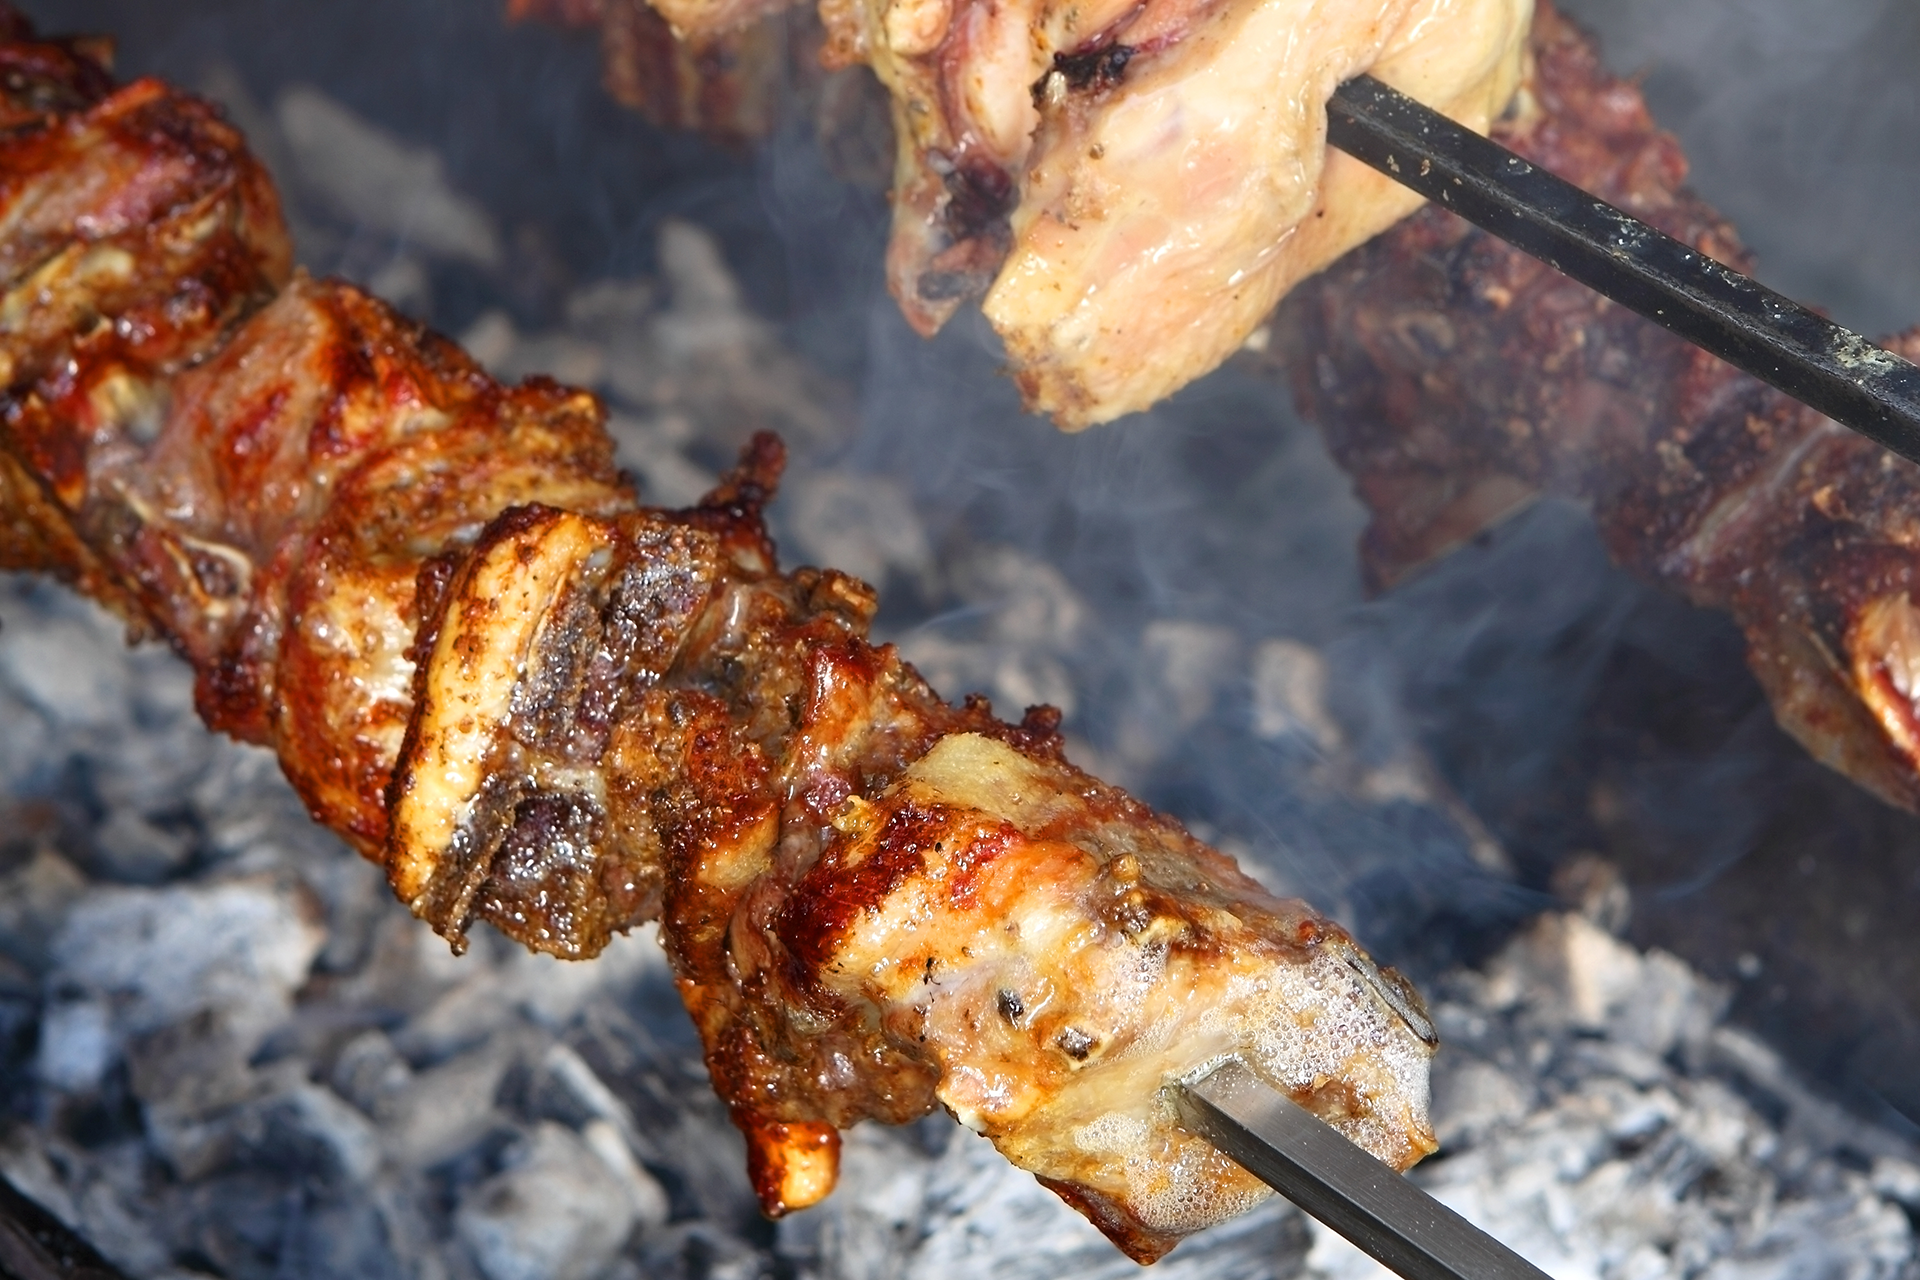 Juicy chunks of marinated meat grilled to smoky perfection